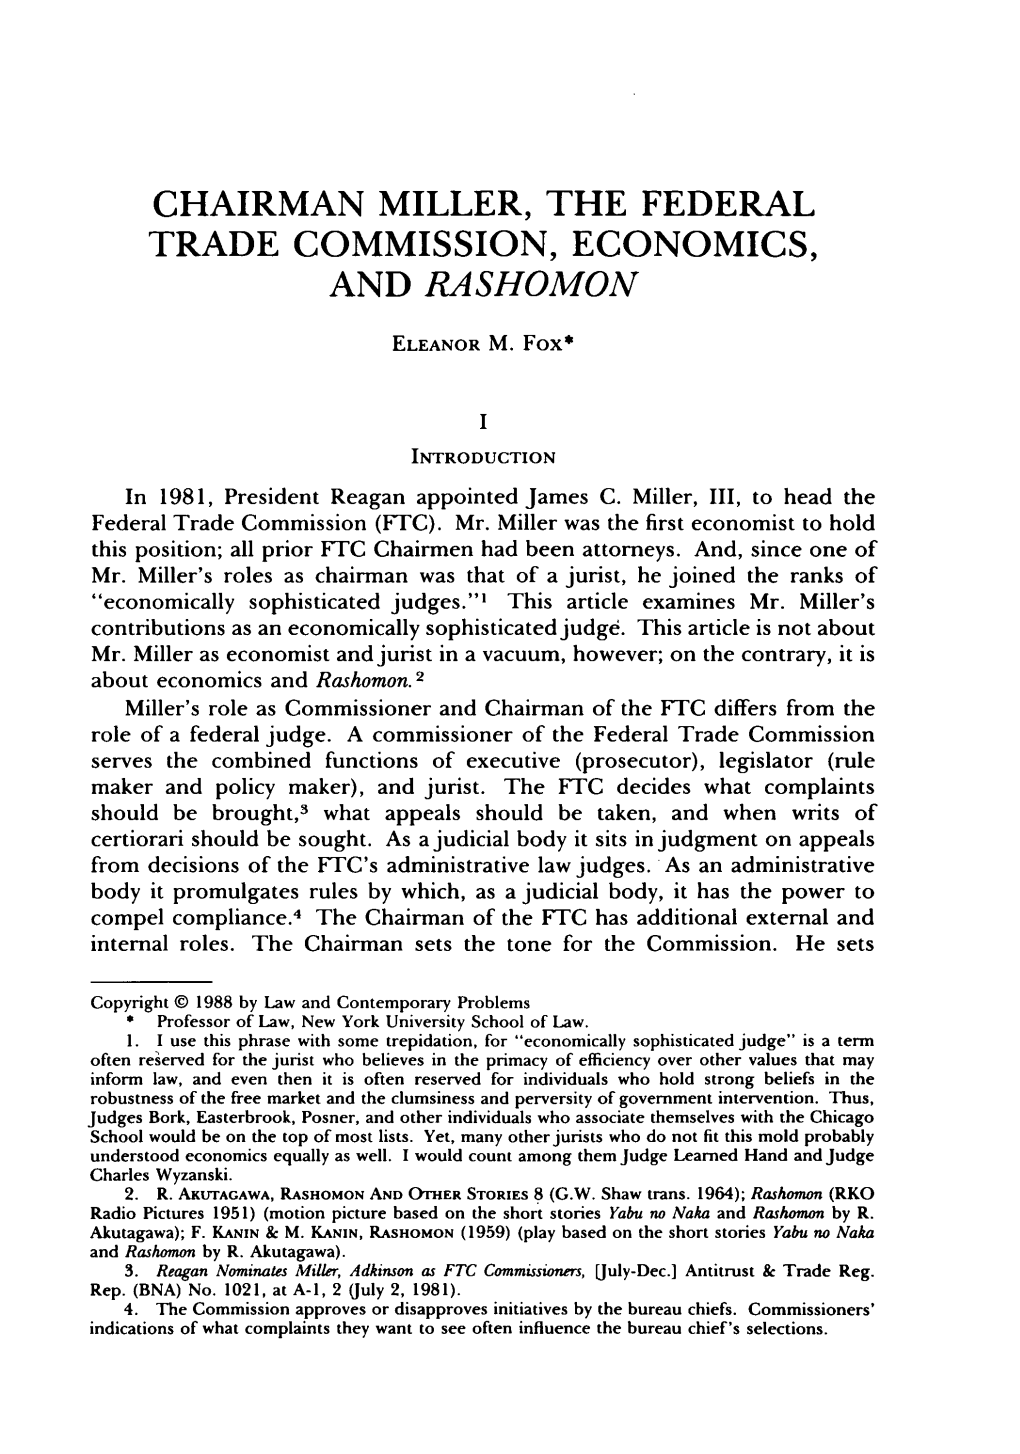 Chairman Miller, the Federal Trade Commission, Economics, and Rashomon